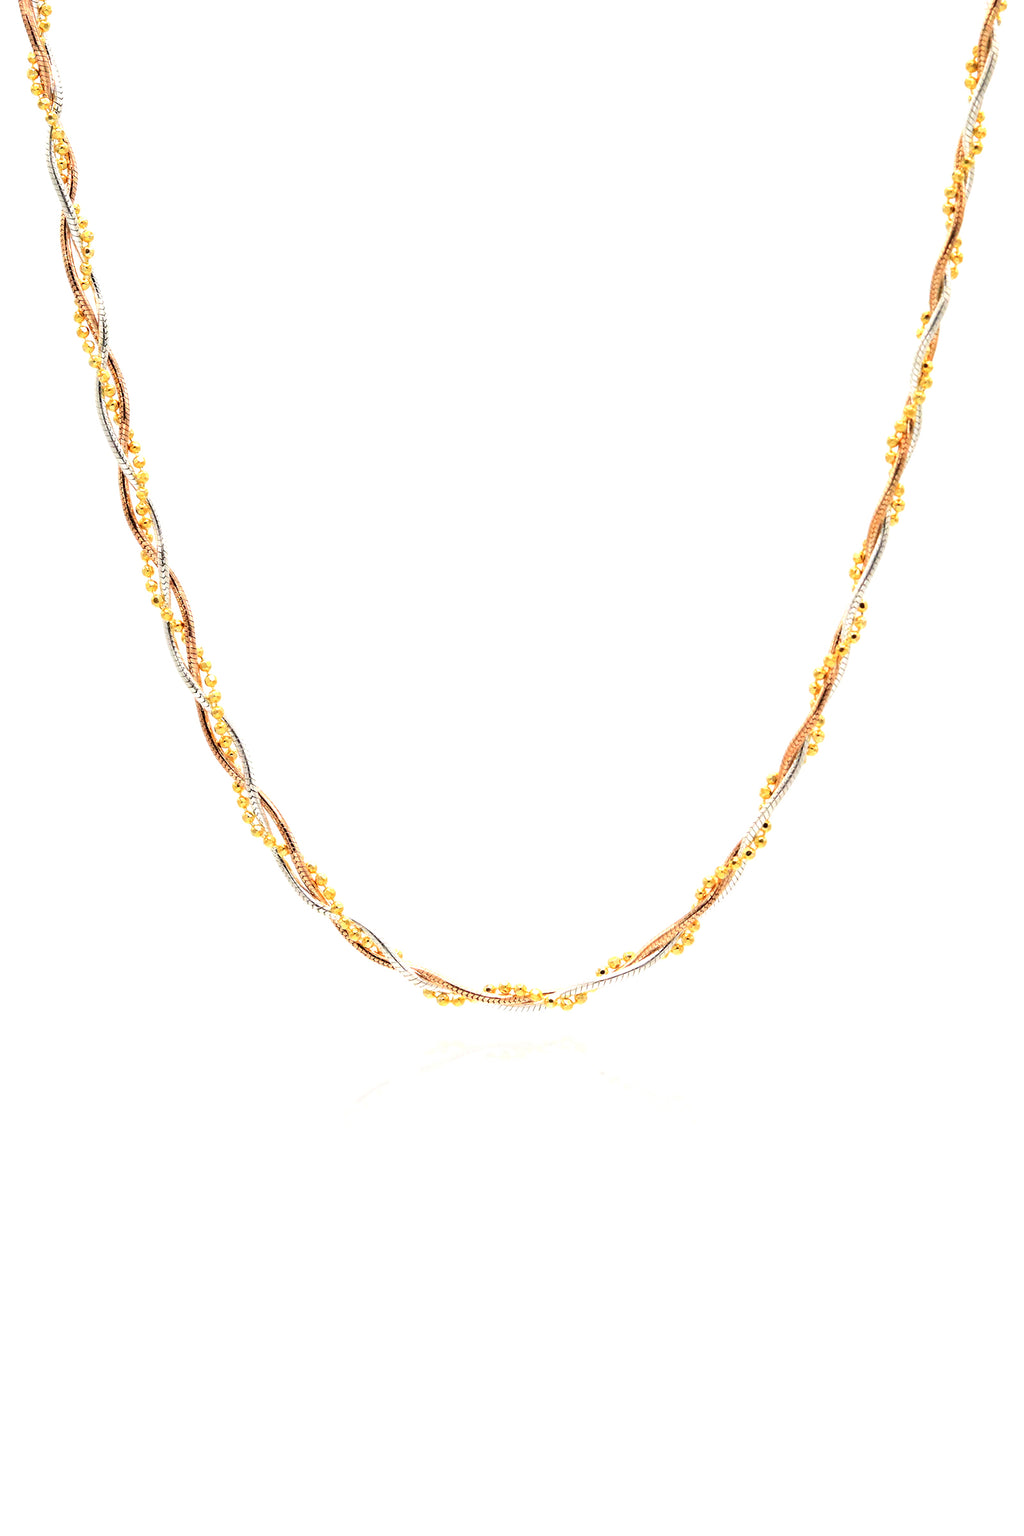 Gold Plated Auger Chain Silver Necklace (NG201019585)